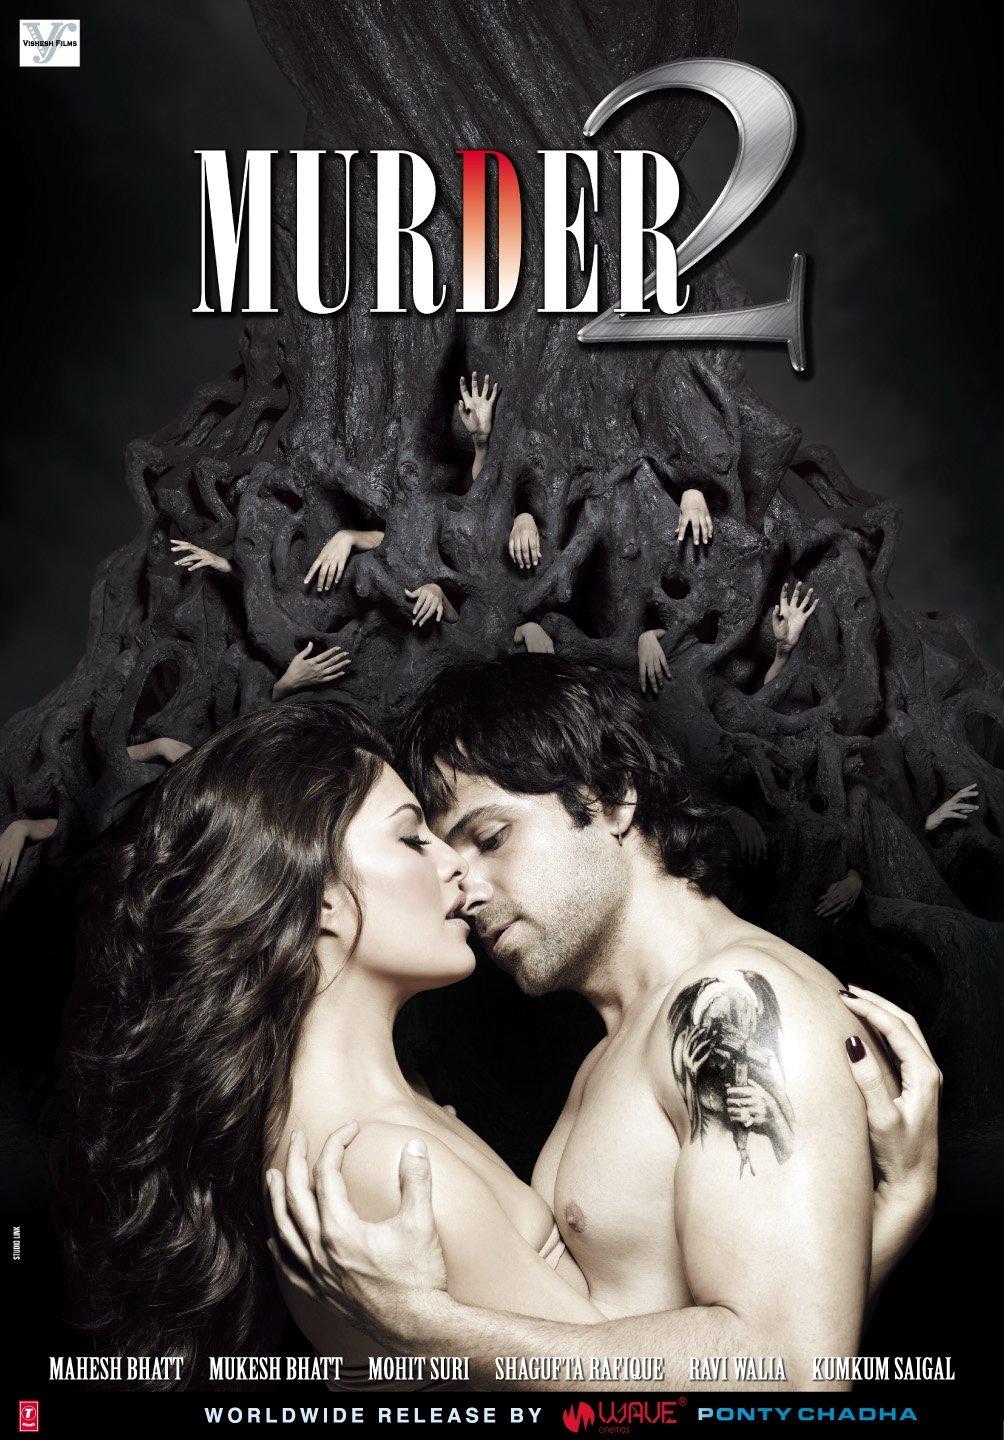 Murder 2:  Building on the success of the original Murder, Emraan Hashmi returned for the sequel, which proved to be another commercial hit. In this installment, Hashmi portrays an ex-cop turned private investigator who gets entangled in a series of gruesome murders.